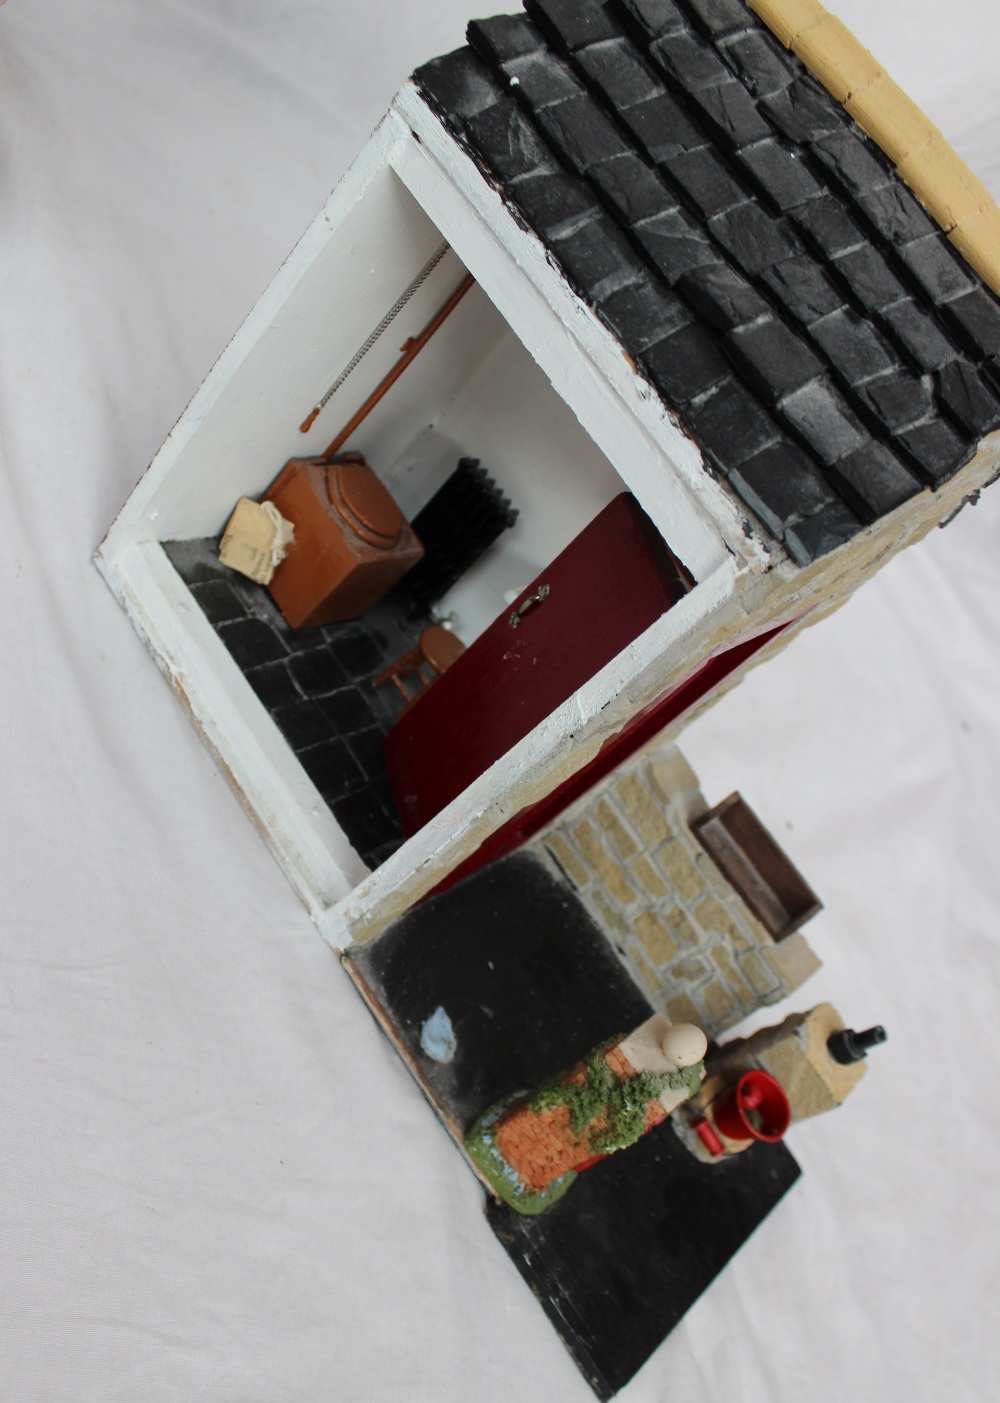 A scratch built dolls house in the form of a shop with a tiled roof, - Image 5 of 7